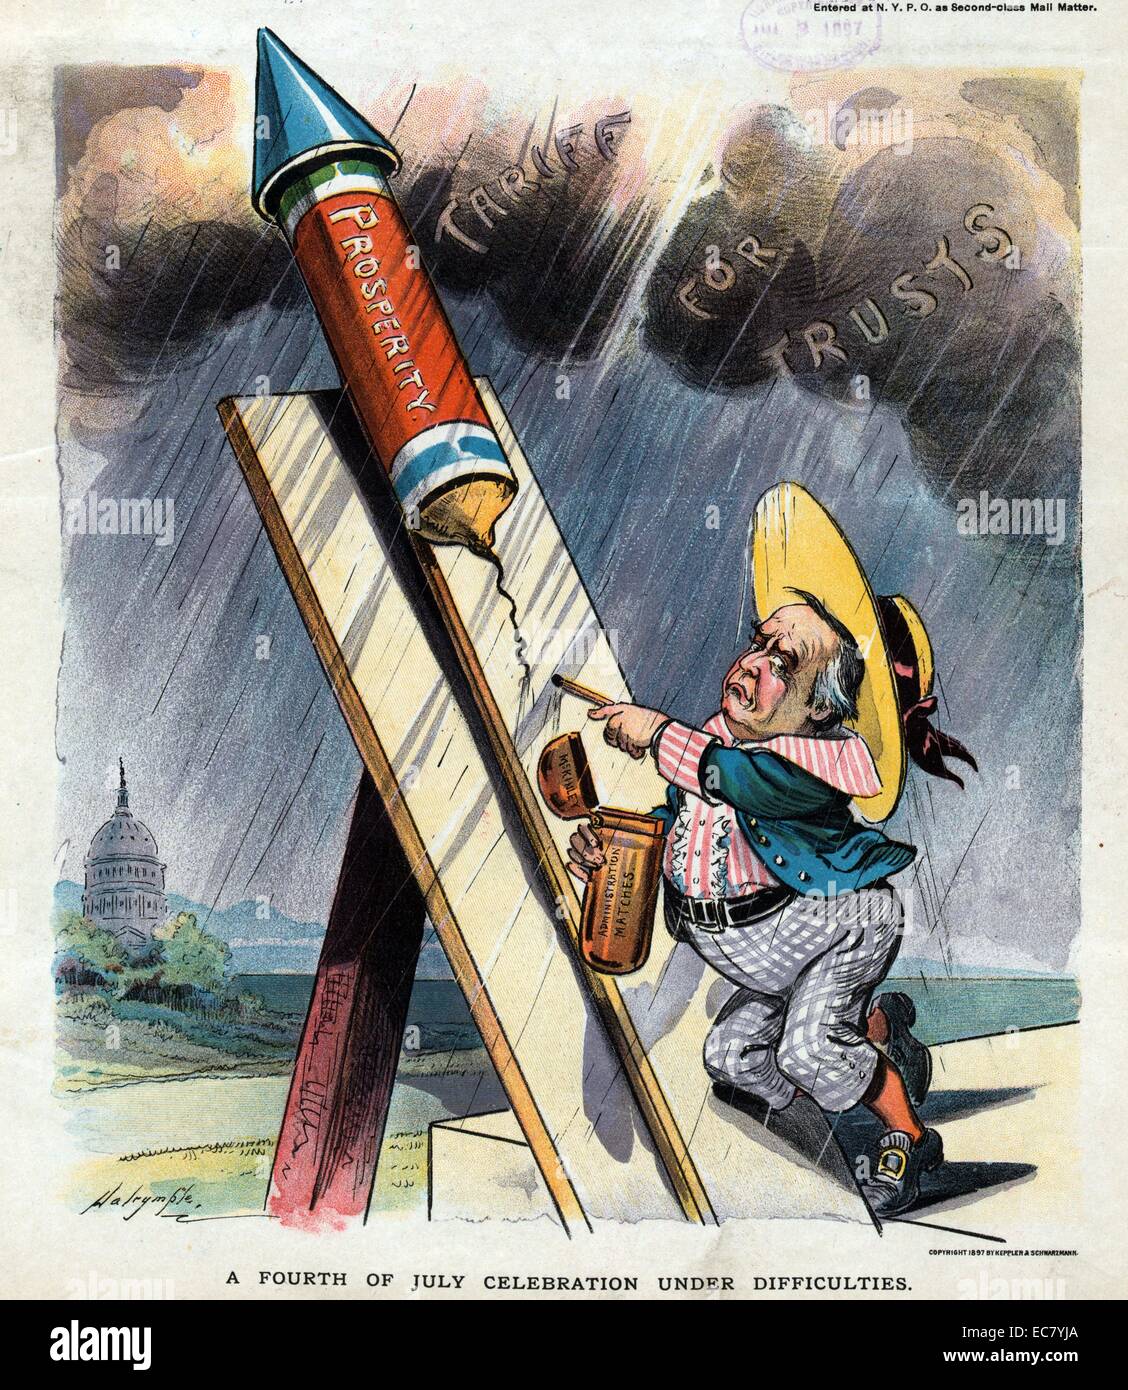 A fourth of July celebration under difficulties' President McKinley, as a young boy, attempting to light the fuse to a fireworks-rocket labelled 'Prosperity' using 'McKinley Administration Matches' during a rain storm beneath dark clouds labelled 'Tariff for Trusts'. Stock Photo